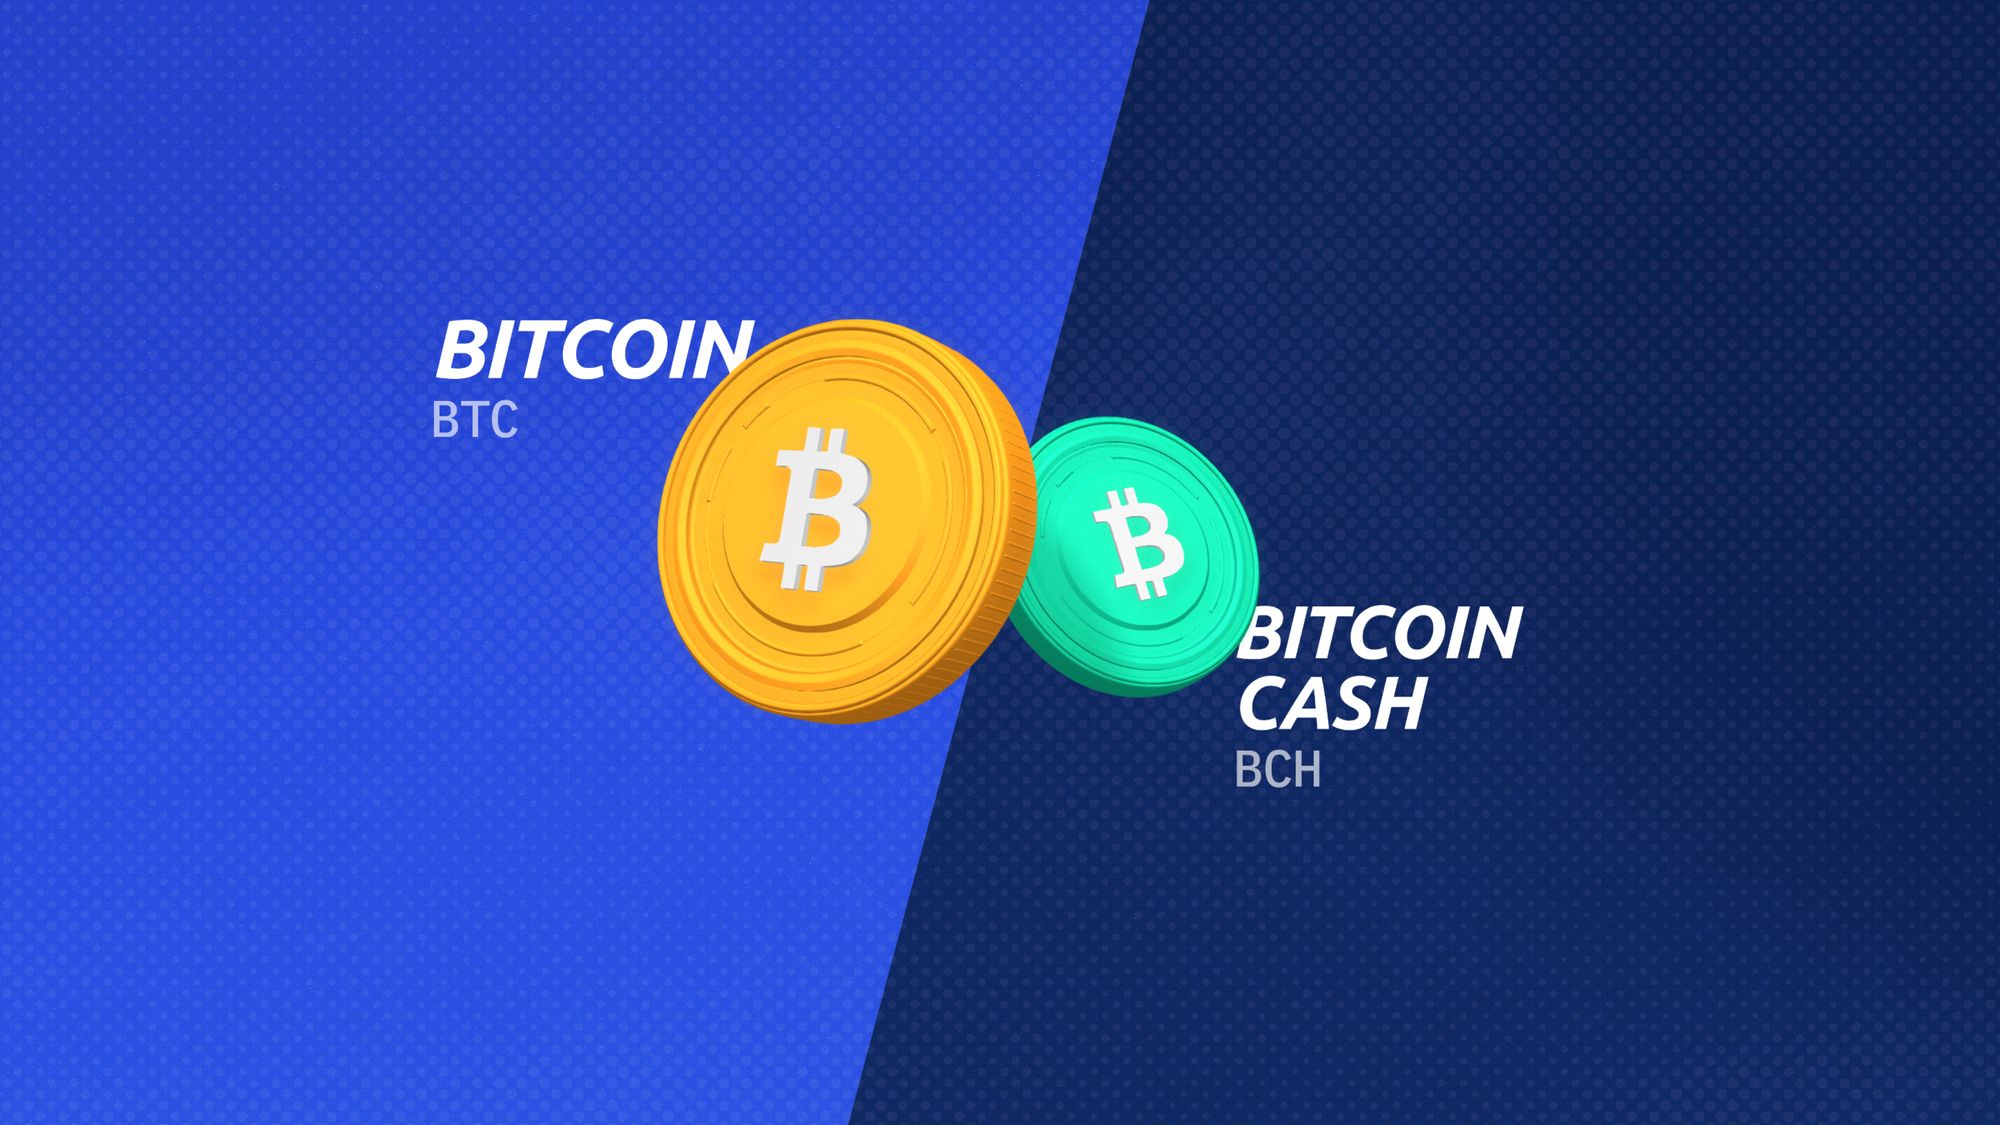 What Is Bitcoin Cash (BCH), and How Does It Work?